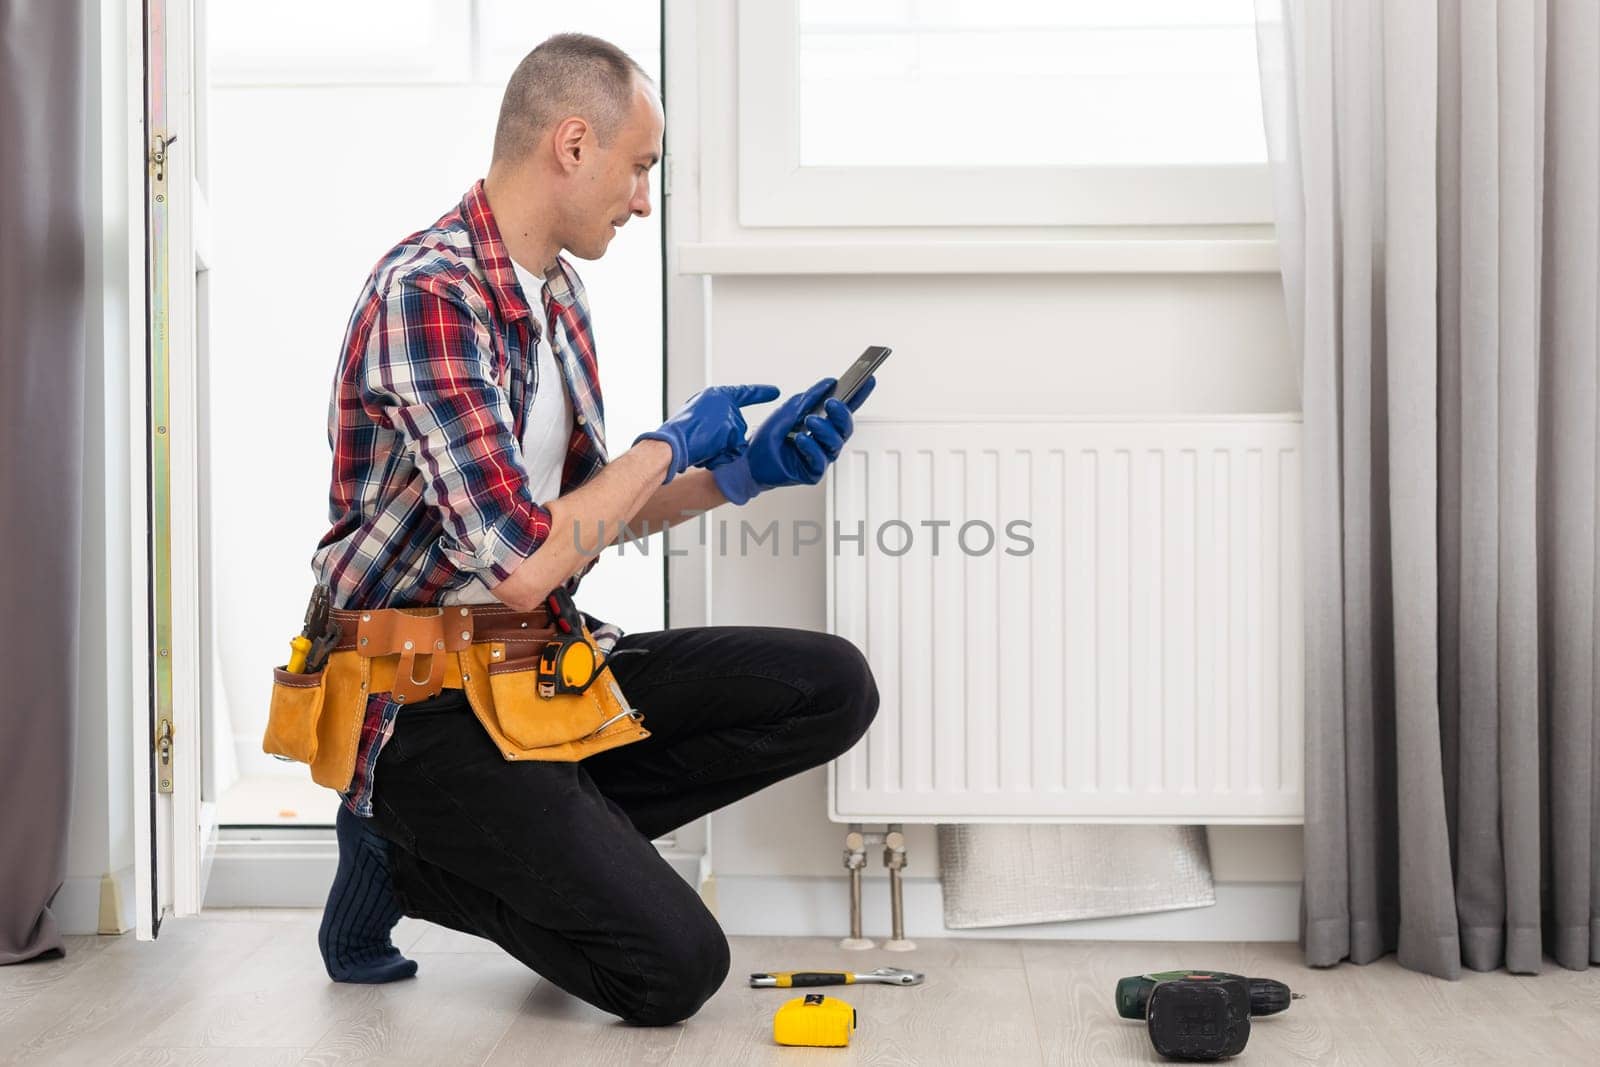 Man in work overalls using wrench while installing heating radiator in room. Young plumber installing heating system in apartment. Concept of radiator installation, plumbing works and home renovation. High quality photo